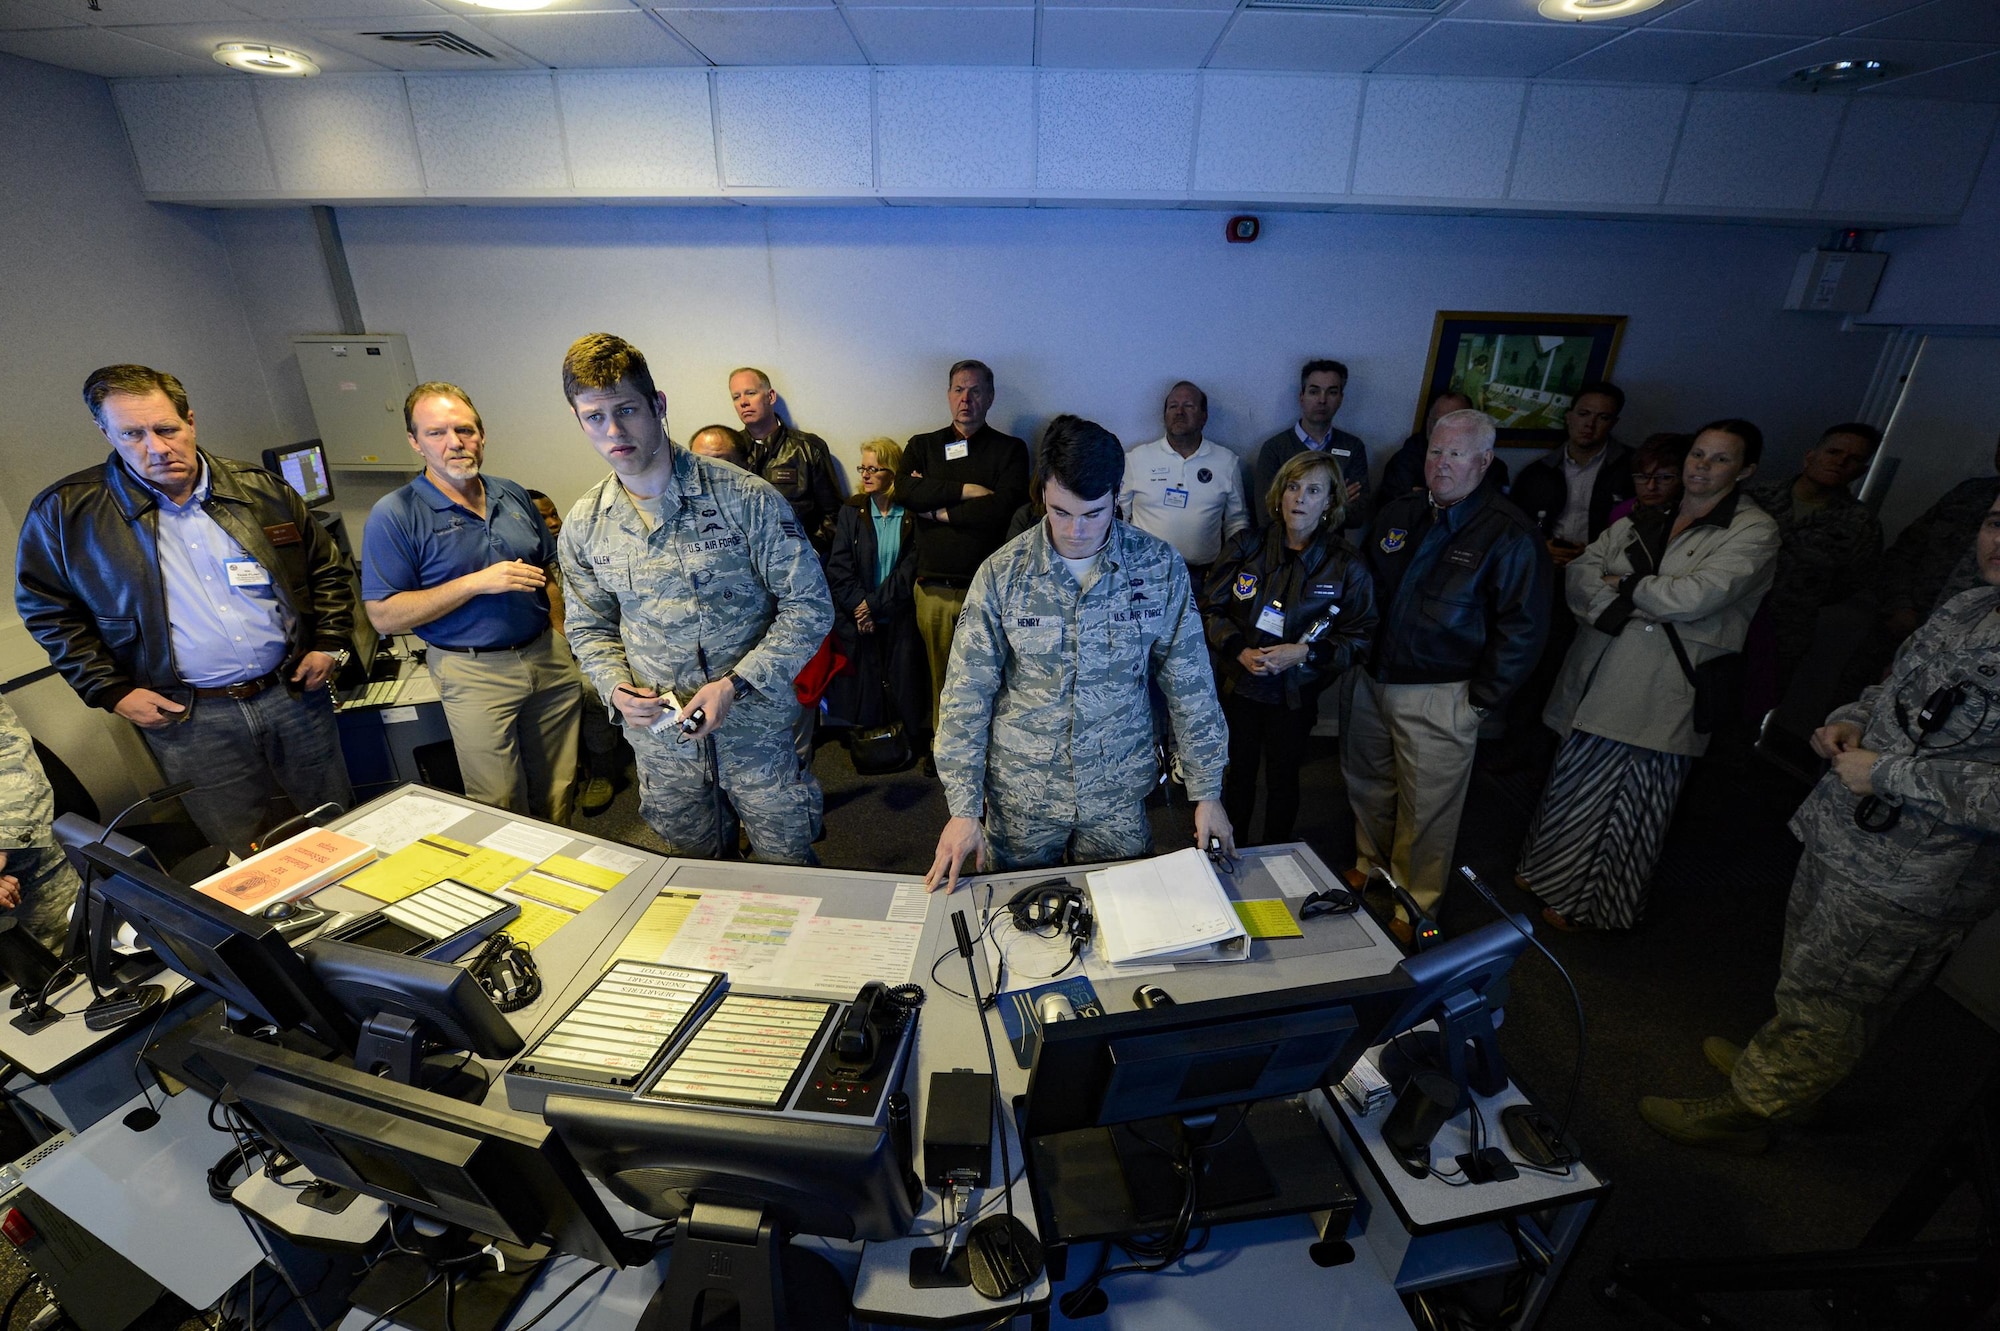 A group of Air Force civic leaders watch a virtual control tower trainer demonstration at Royal Air Force Mildenhall England, April 19, 2016, during a weeklong civic leader trip to several bases in Europe. Air Force civic leaders are unpaid advisers, key communicators and advocates for the Air Force, April 19, 2016. (U.S. Air Force photo/Tech. Sgt. Joshua DeMotts)